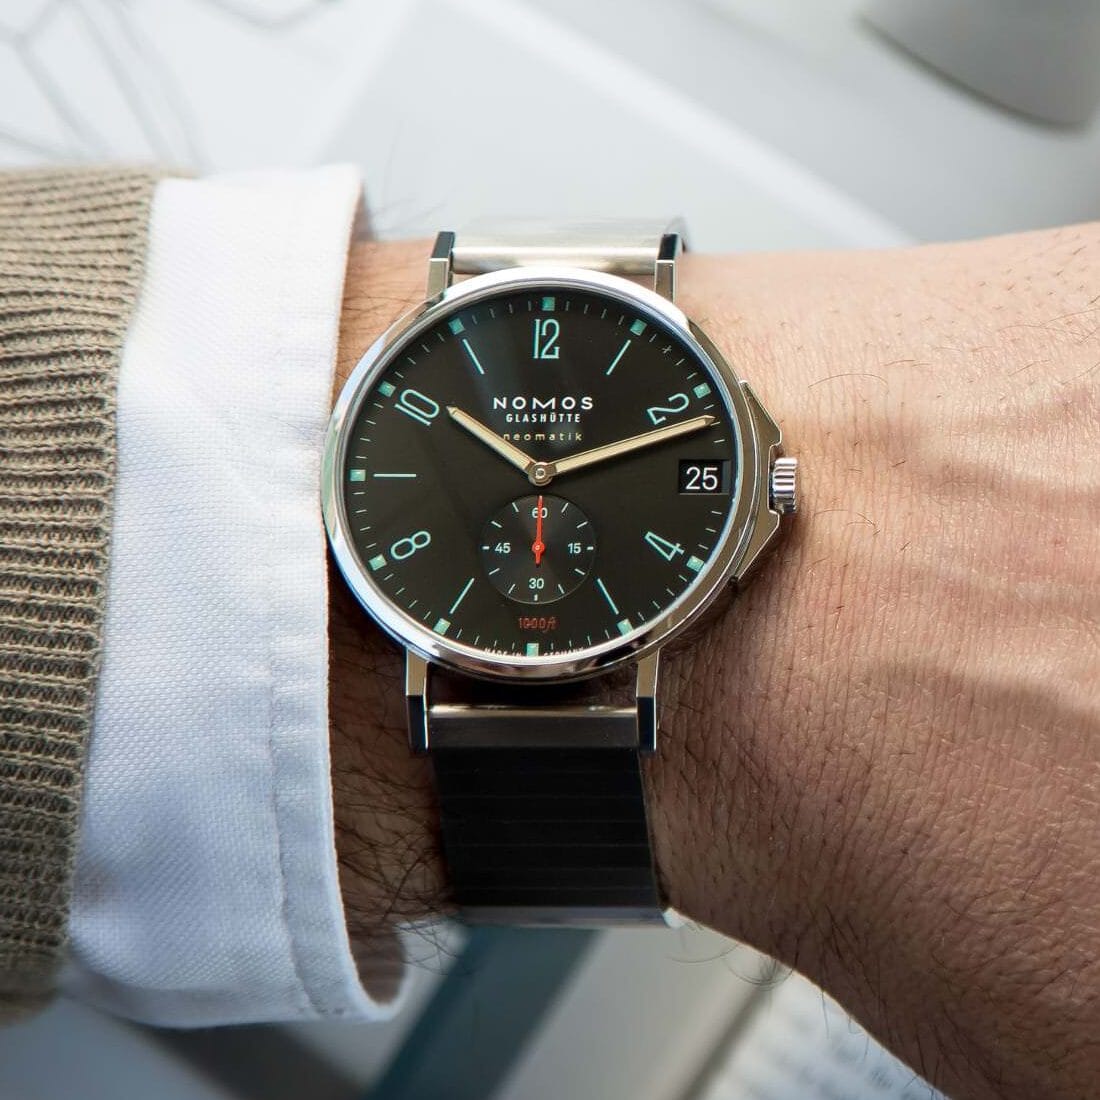 A buying guide to the best thin watches for men | OPUMO Magazine